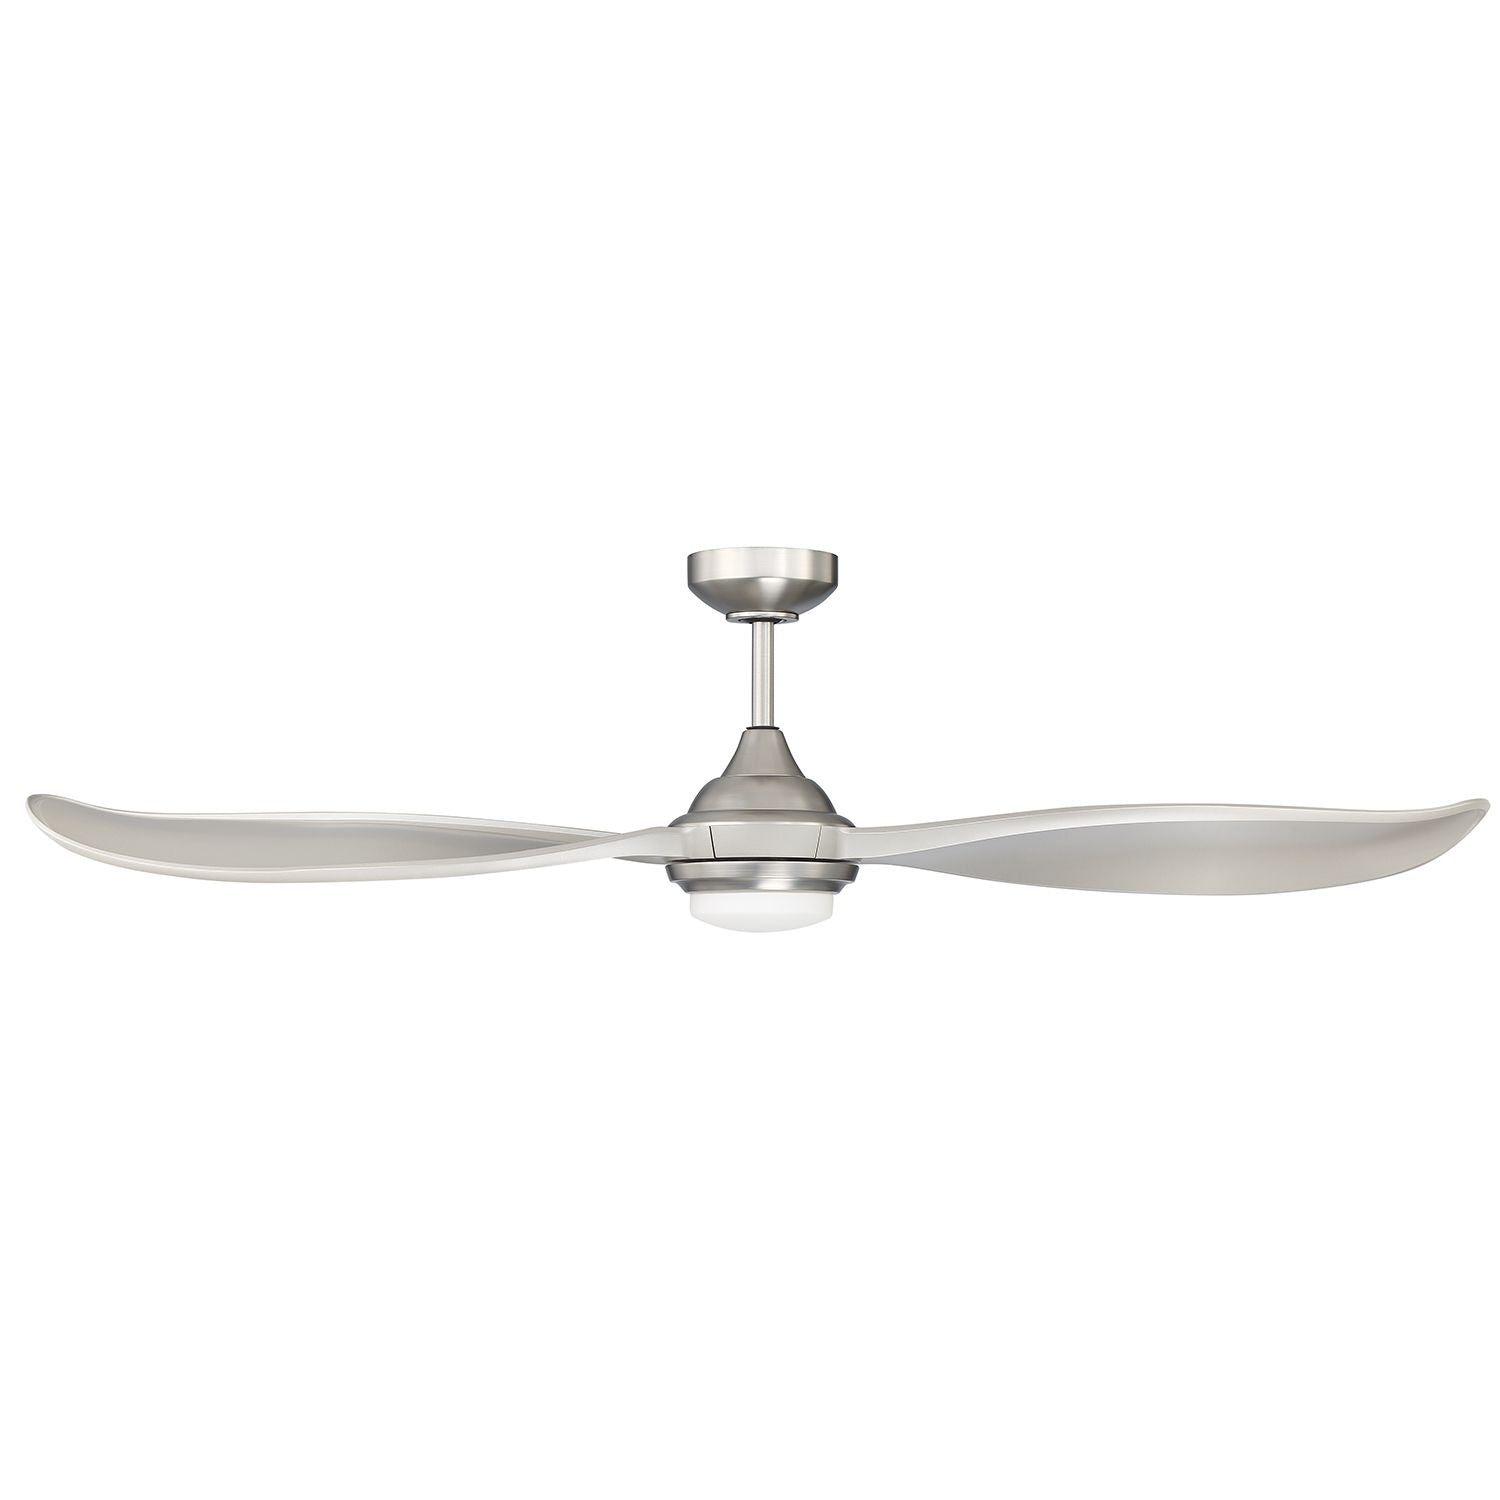 Deuce Ceiling Fan Satin Nickel with matching blades